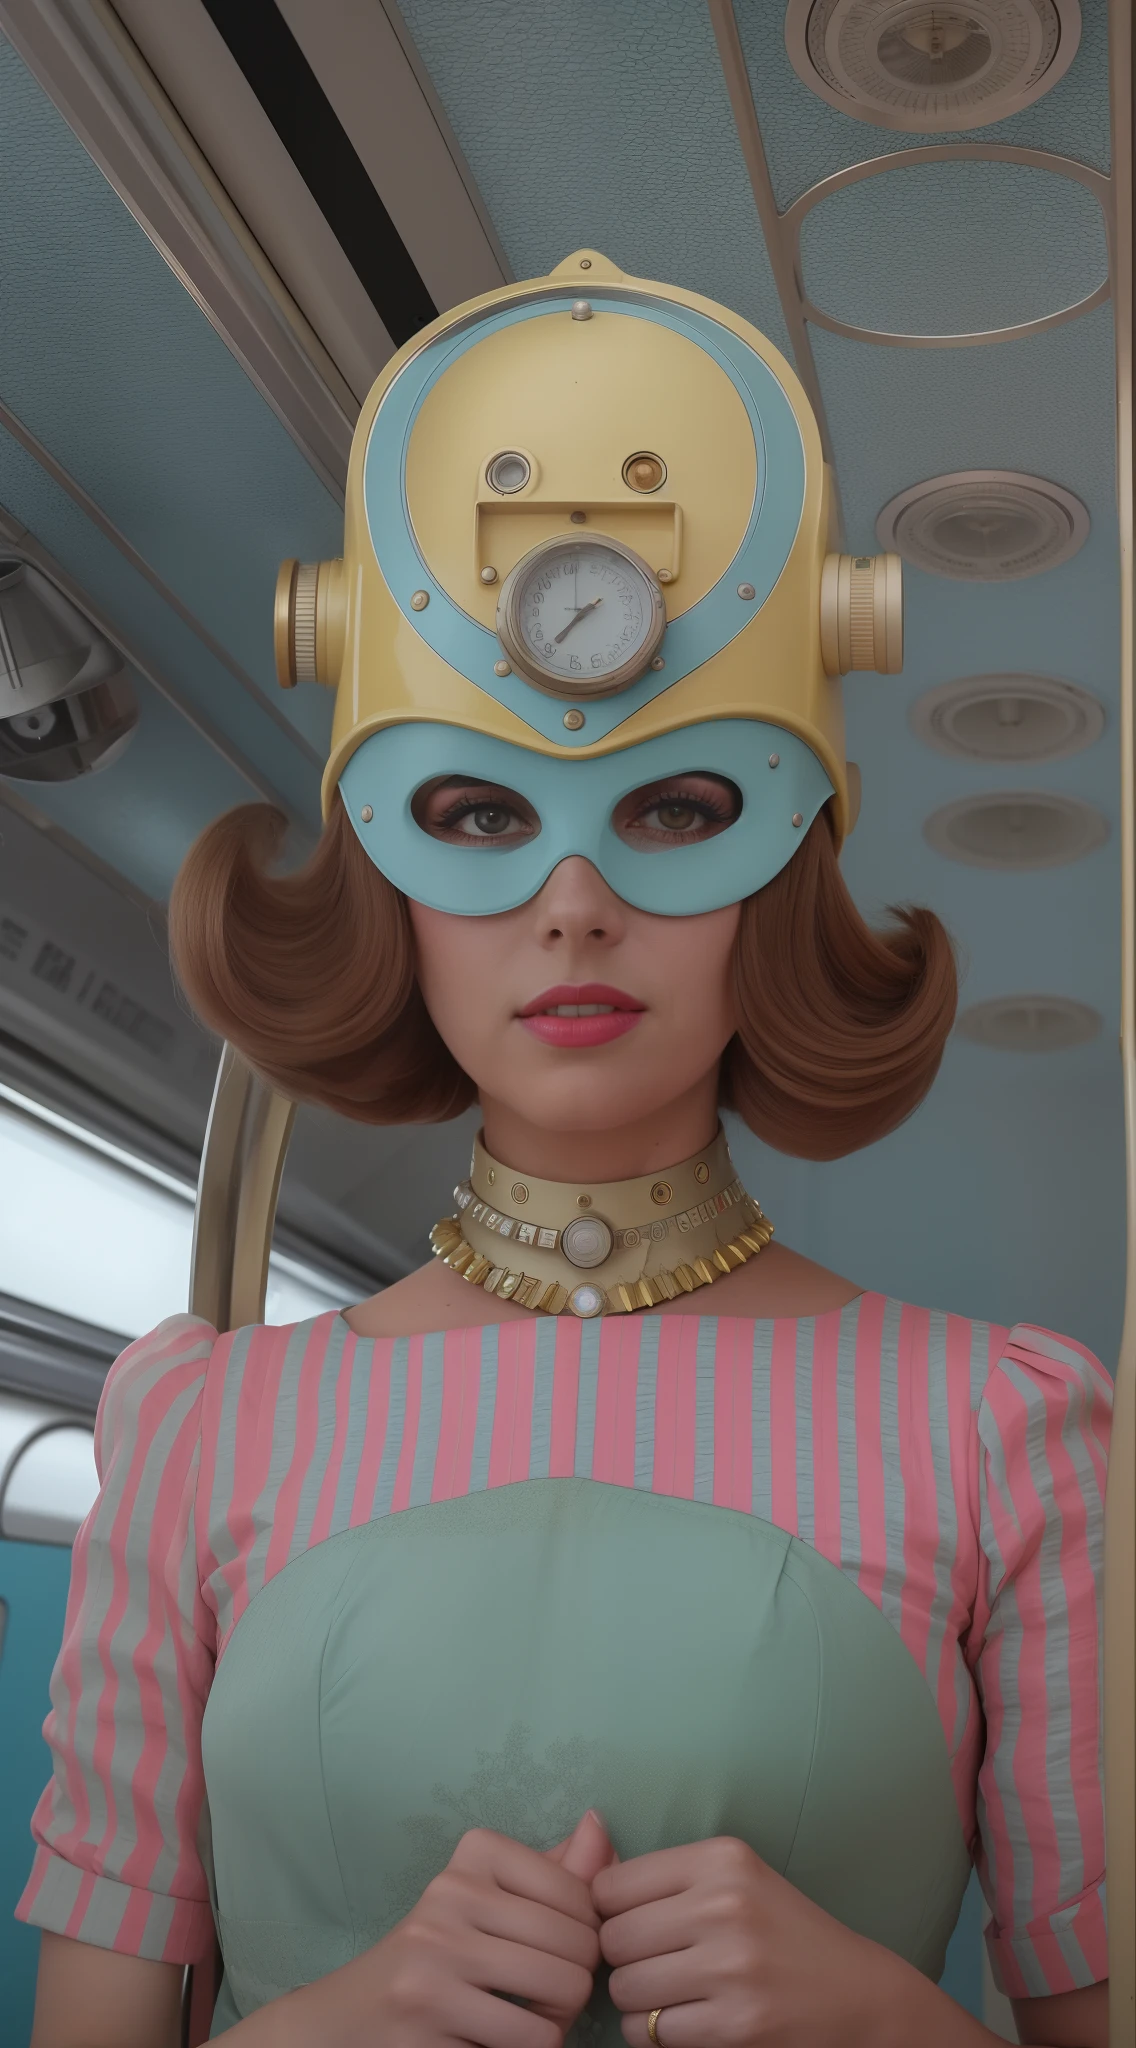 8k portrait of a 1960s science fiction film by Wes Anderson, Vogue anos 1960, pastels colors, There are people wearing futuristic animal masks and wearing extravagant retro fashion outfits and men and women wearing alien makeup and antique ornaments with mechanical pets in a park, Luz Natural, Psicodelia, futurista estranho, fotorrealista, hiper detalhado, foco nítido, Intrinsic, Fuji filmes 55mm,